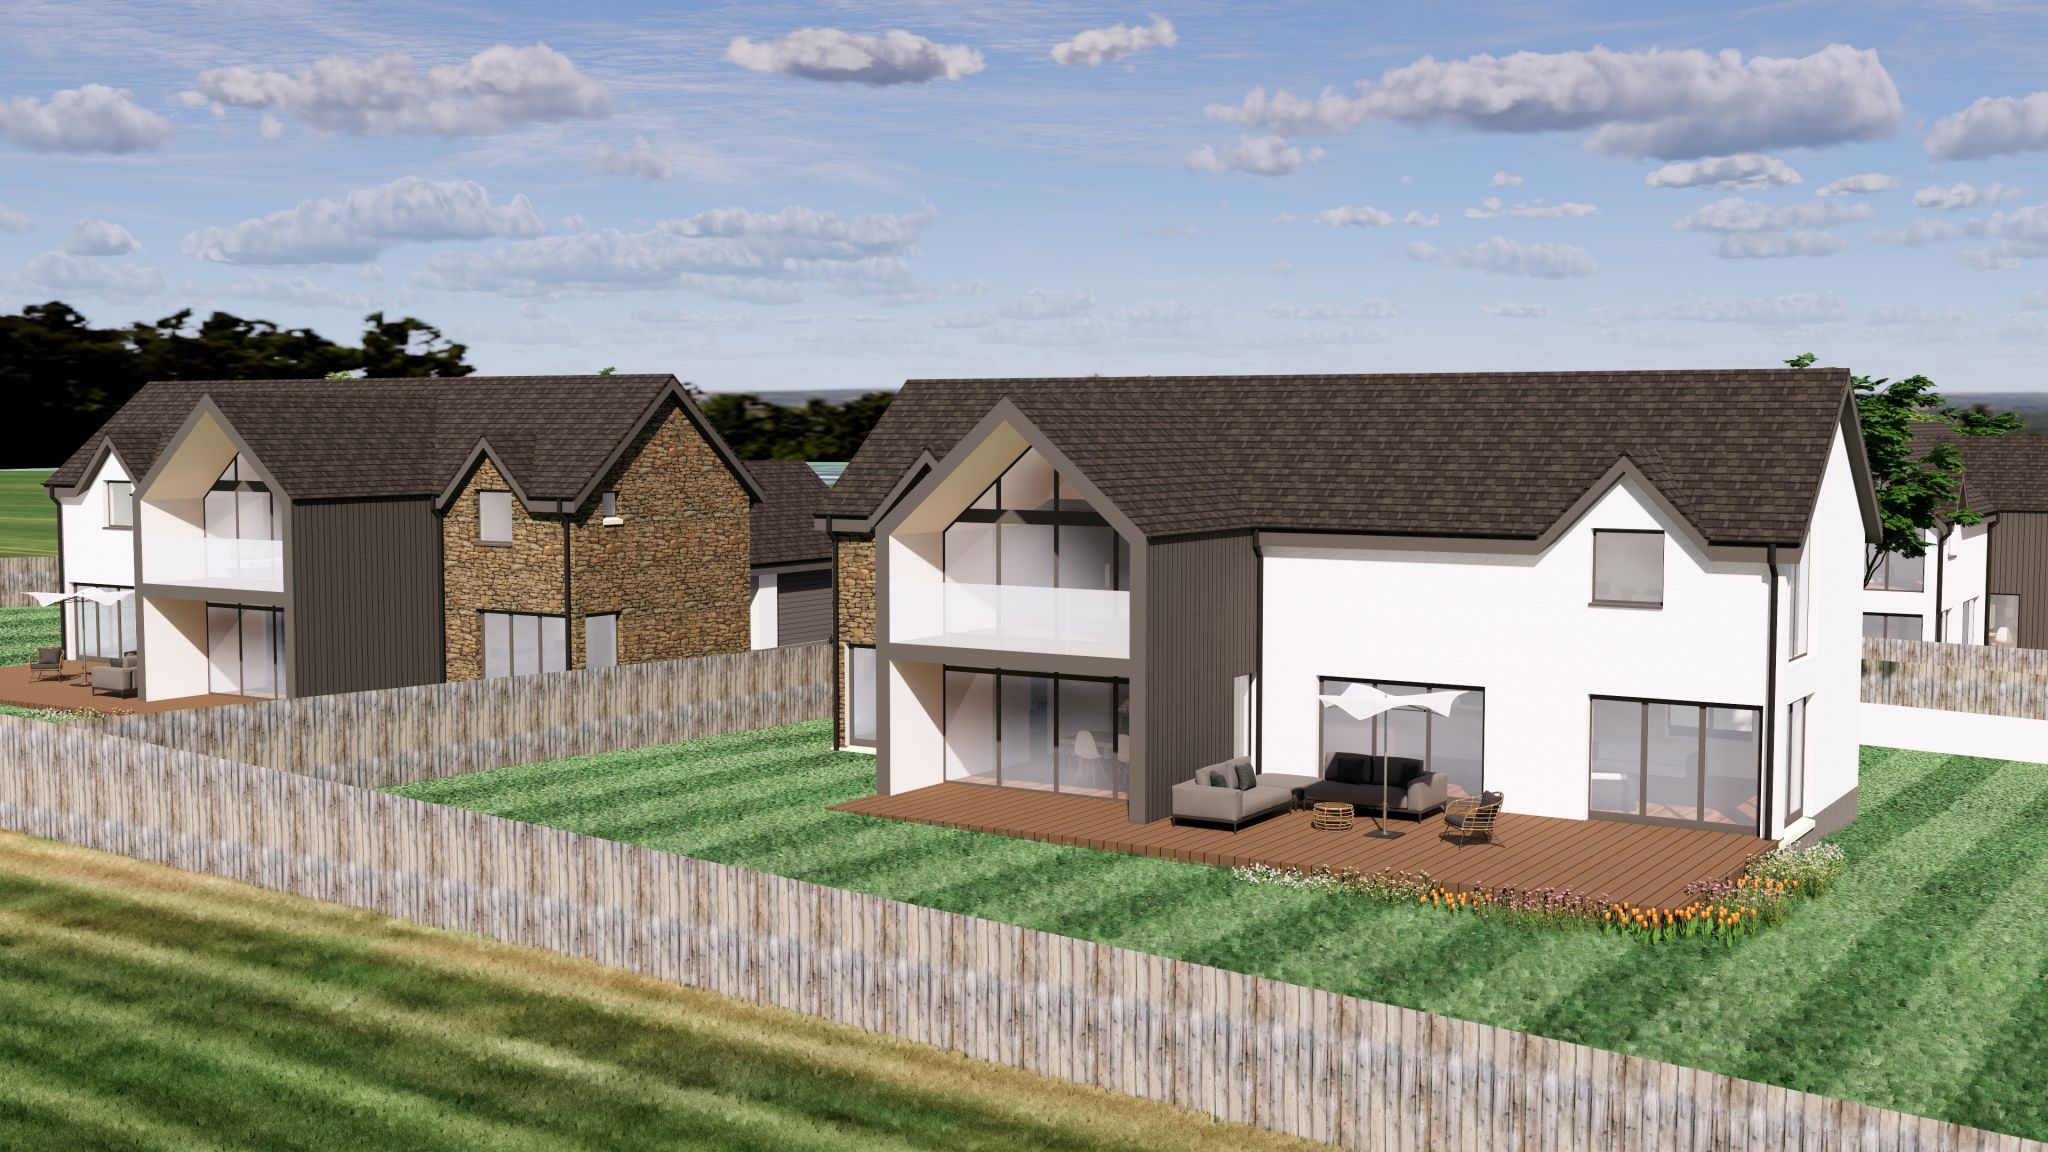 Video: Voigt gains permission for five new homes in Angus